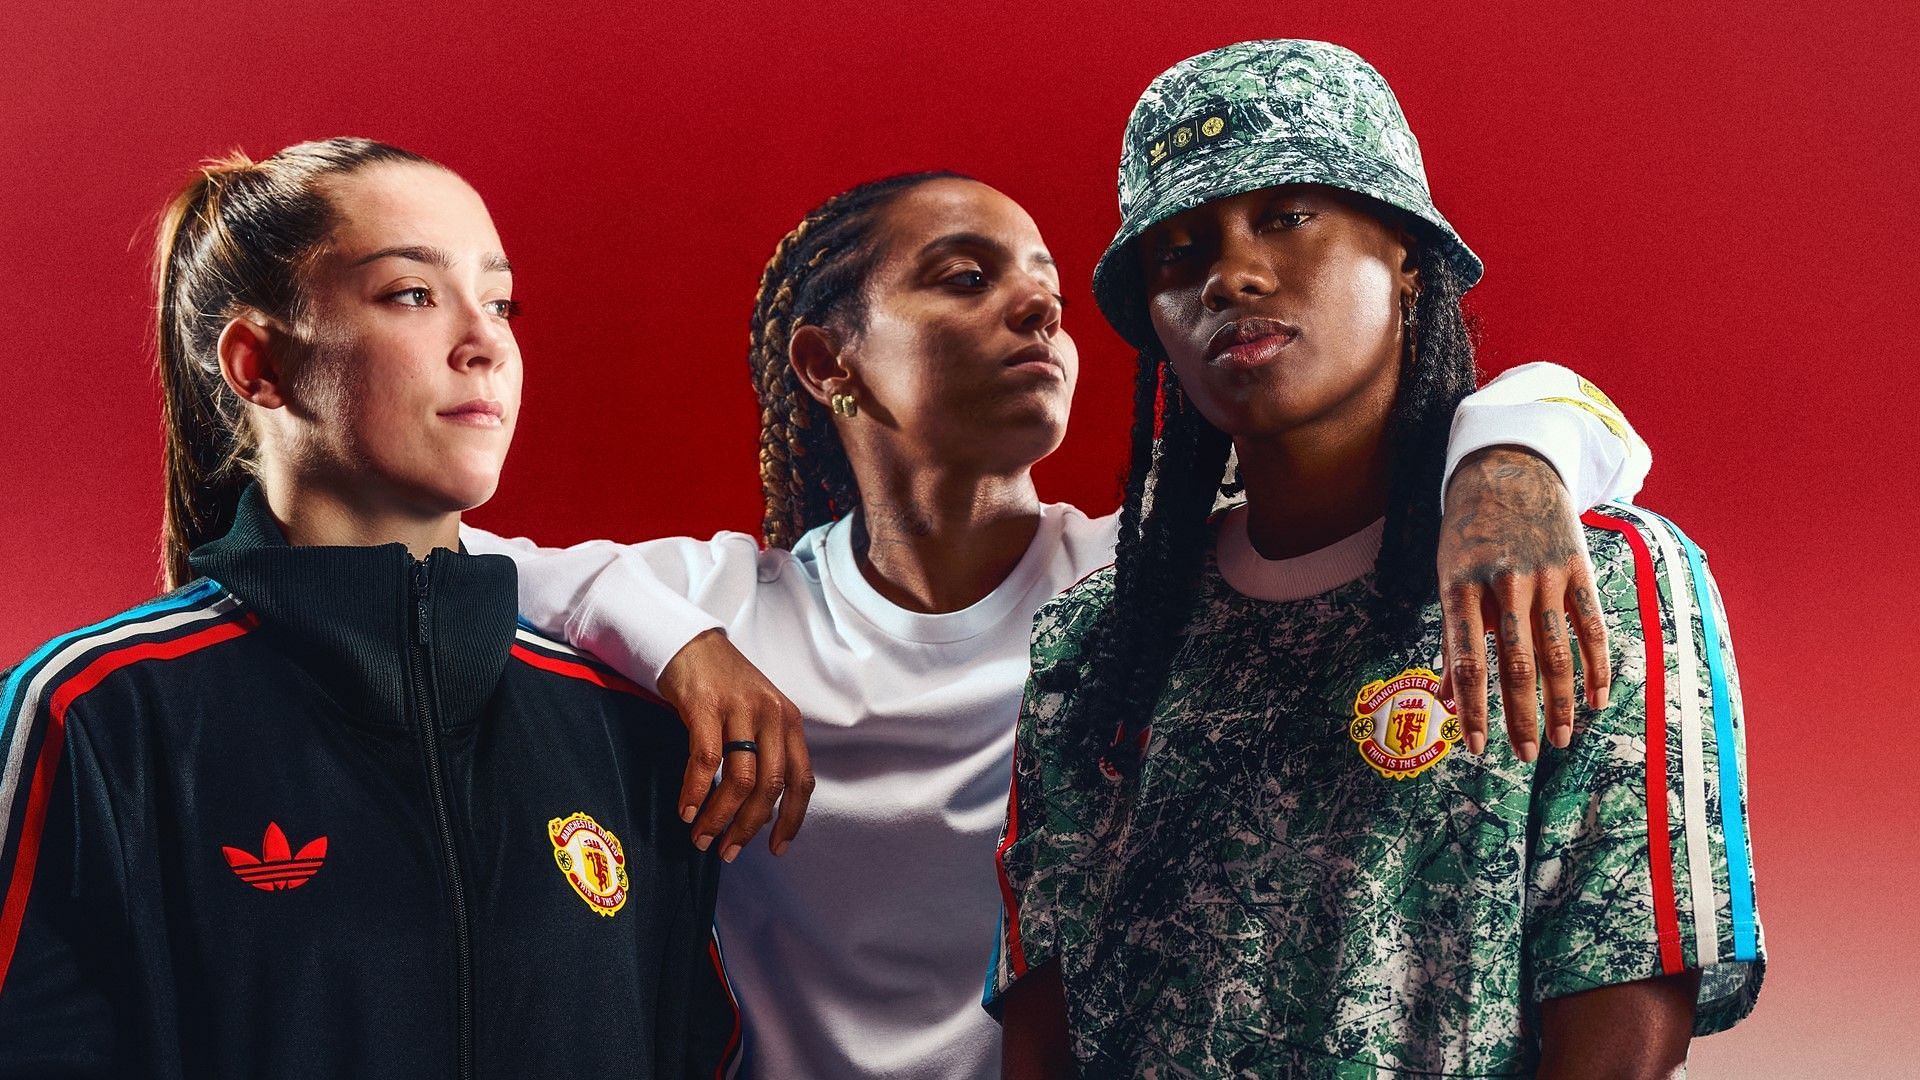 The Stone Roses x Adidas apparel collection